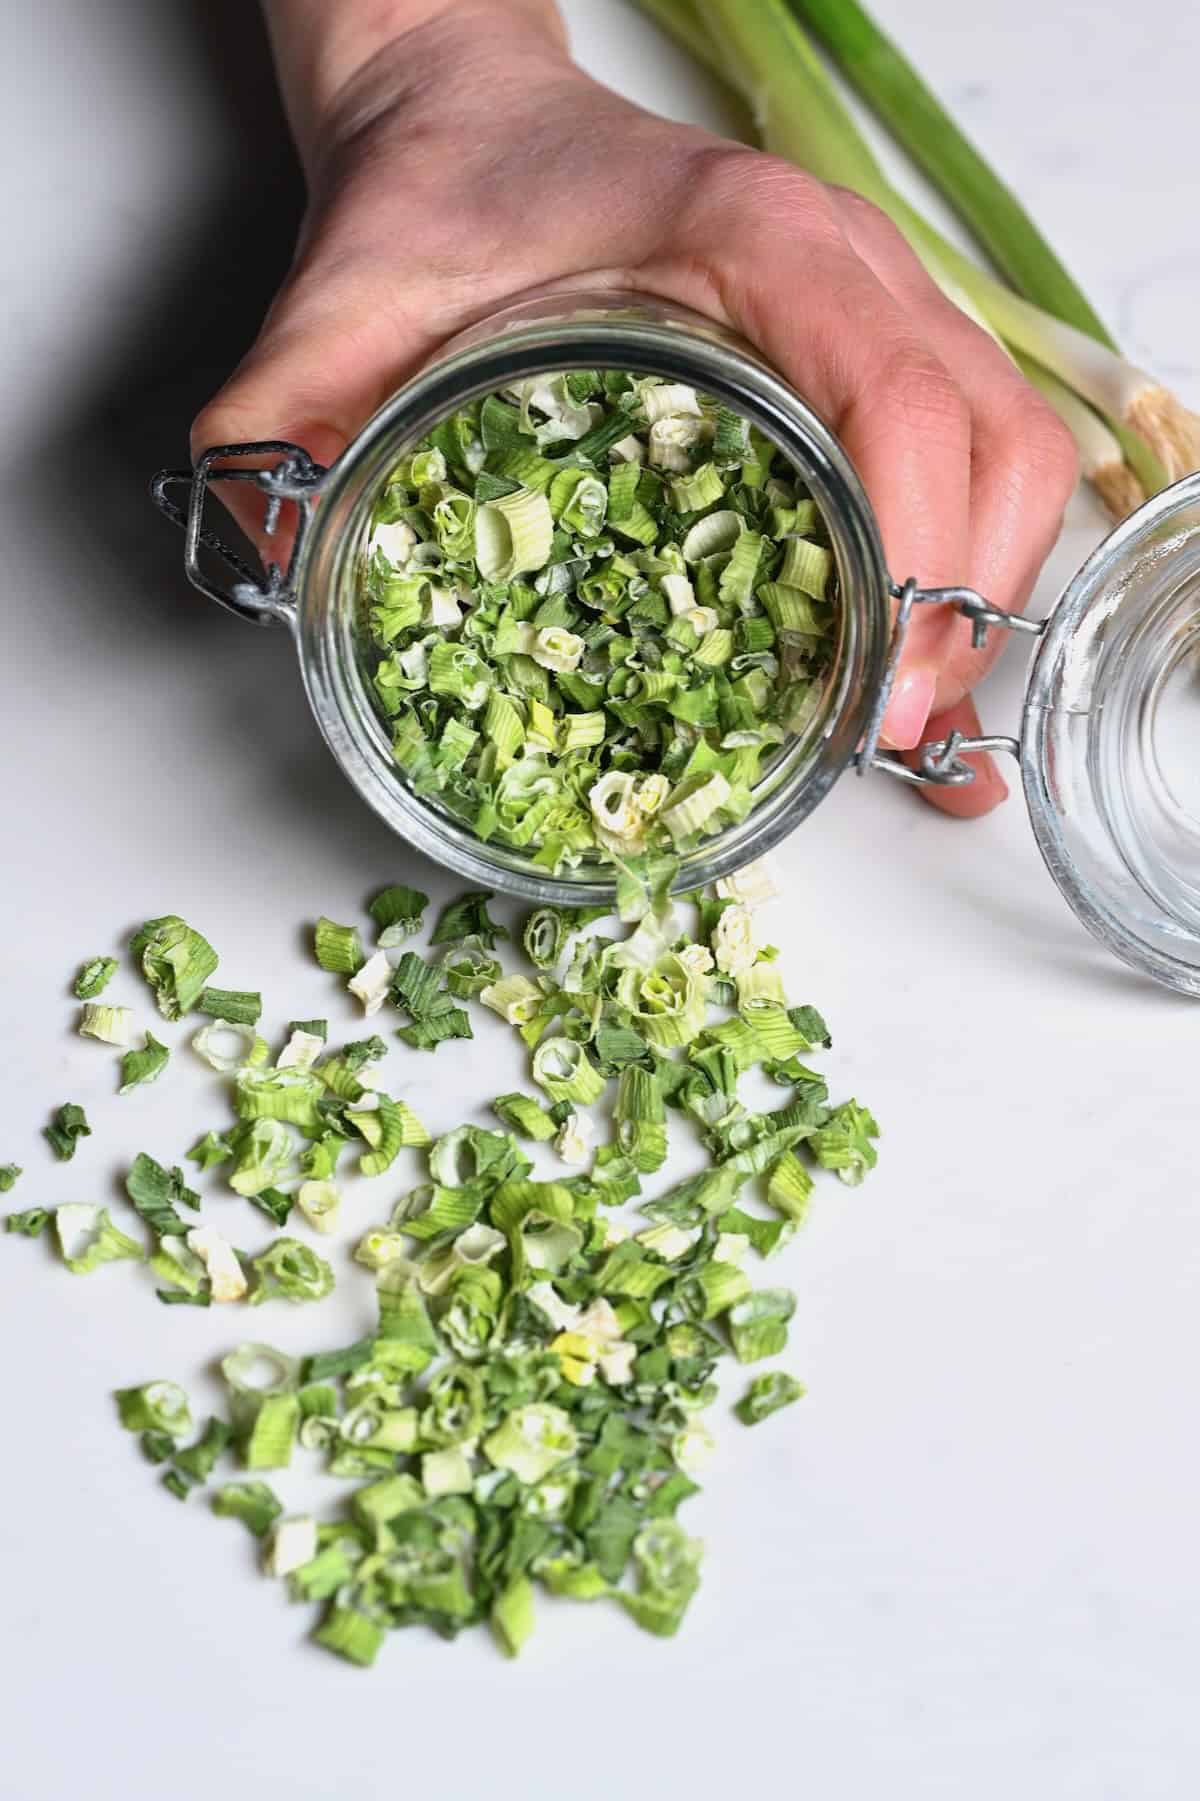 How to Select, Store, Prep, and Chop Scallions